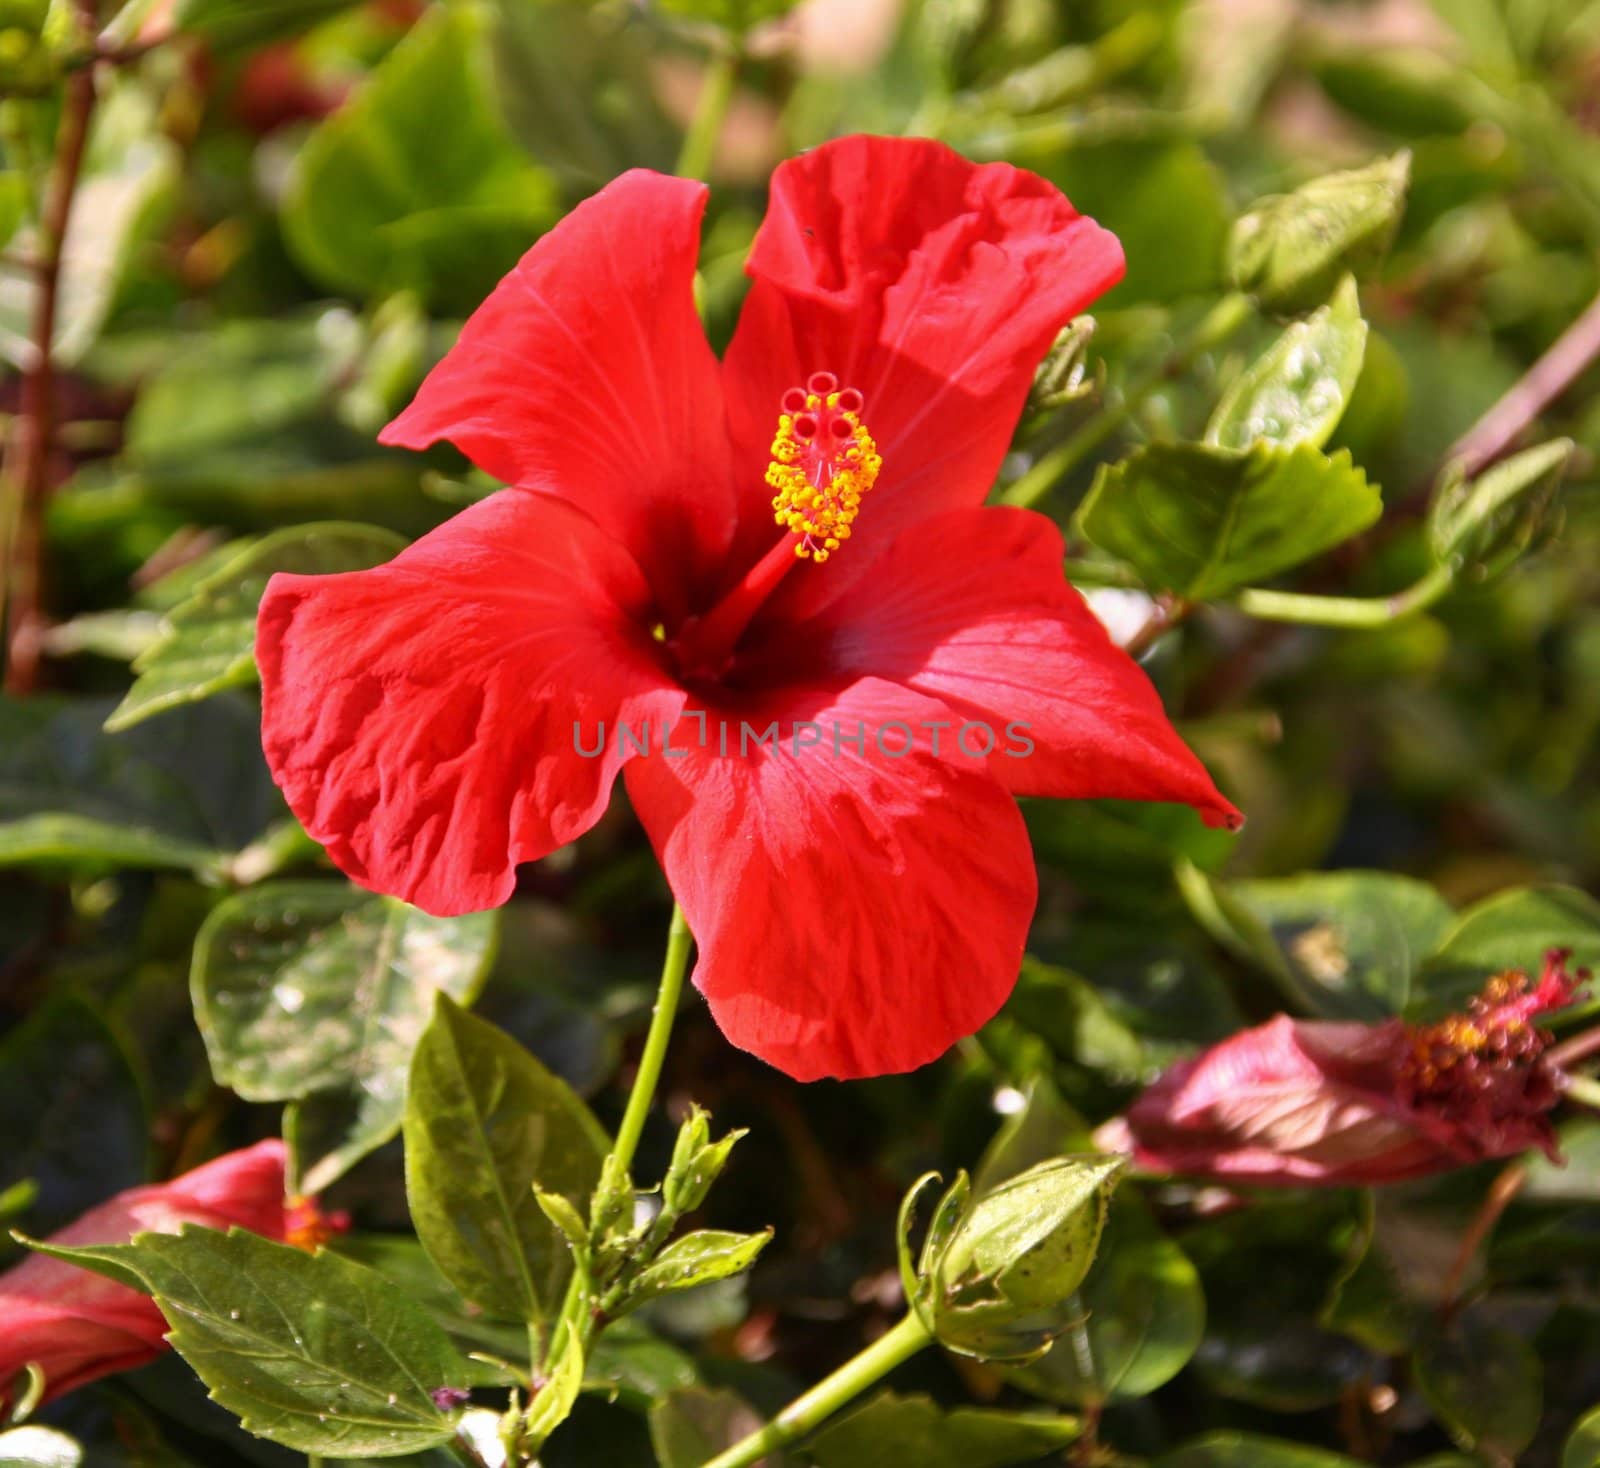 Red Hibiscus flower  by jnerad